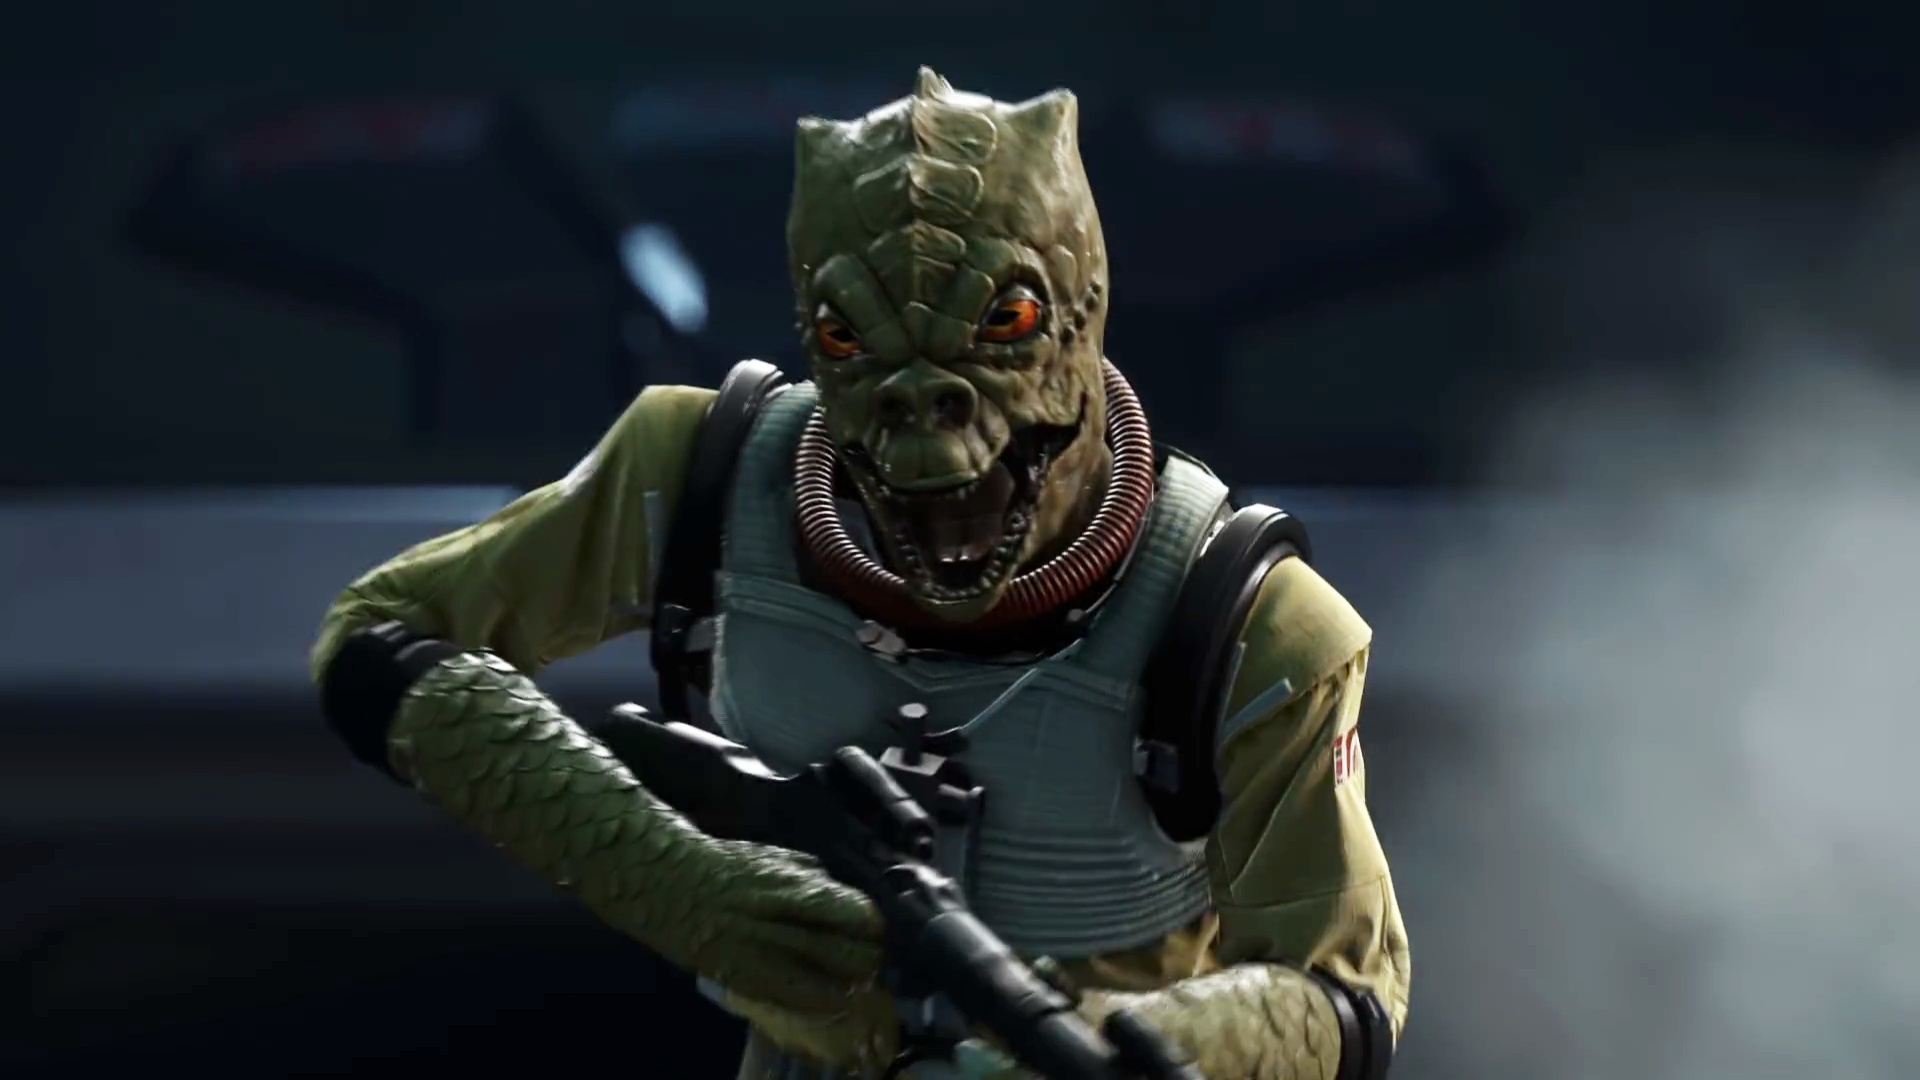 Bossk in the Death Star DLC.